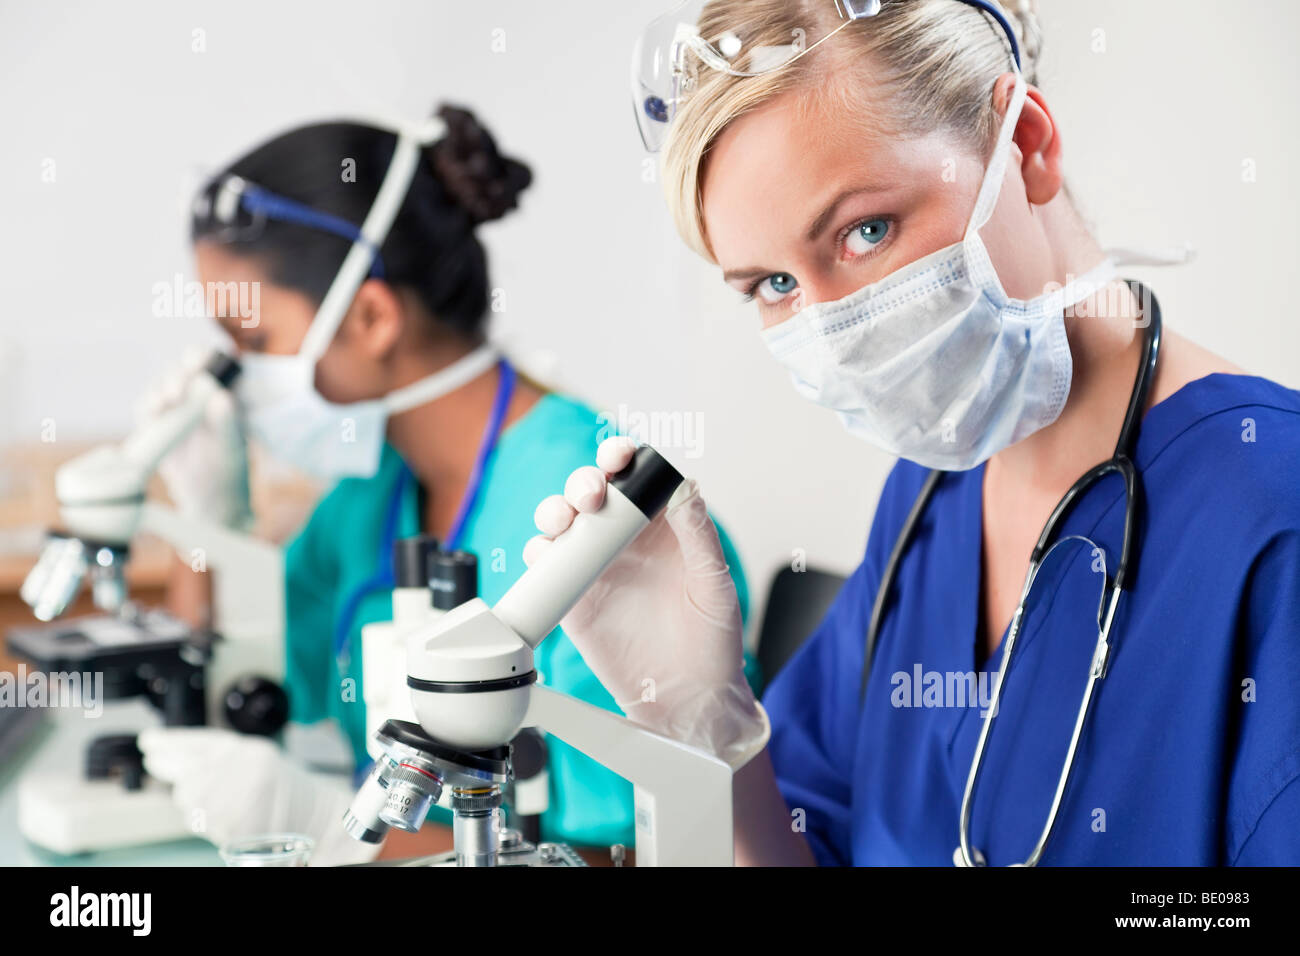 A blond female medical or scientific researcher or doctor using her microscope in a laboratory with her Asian colleague Stock Photo